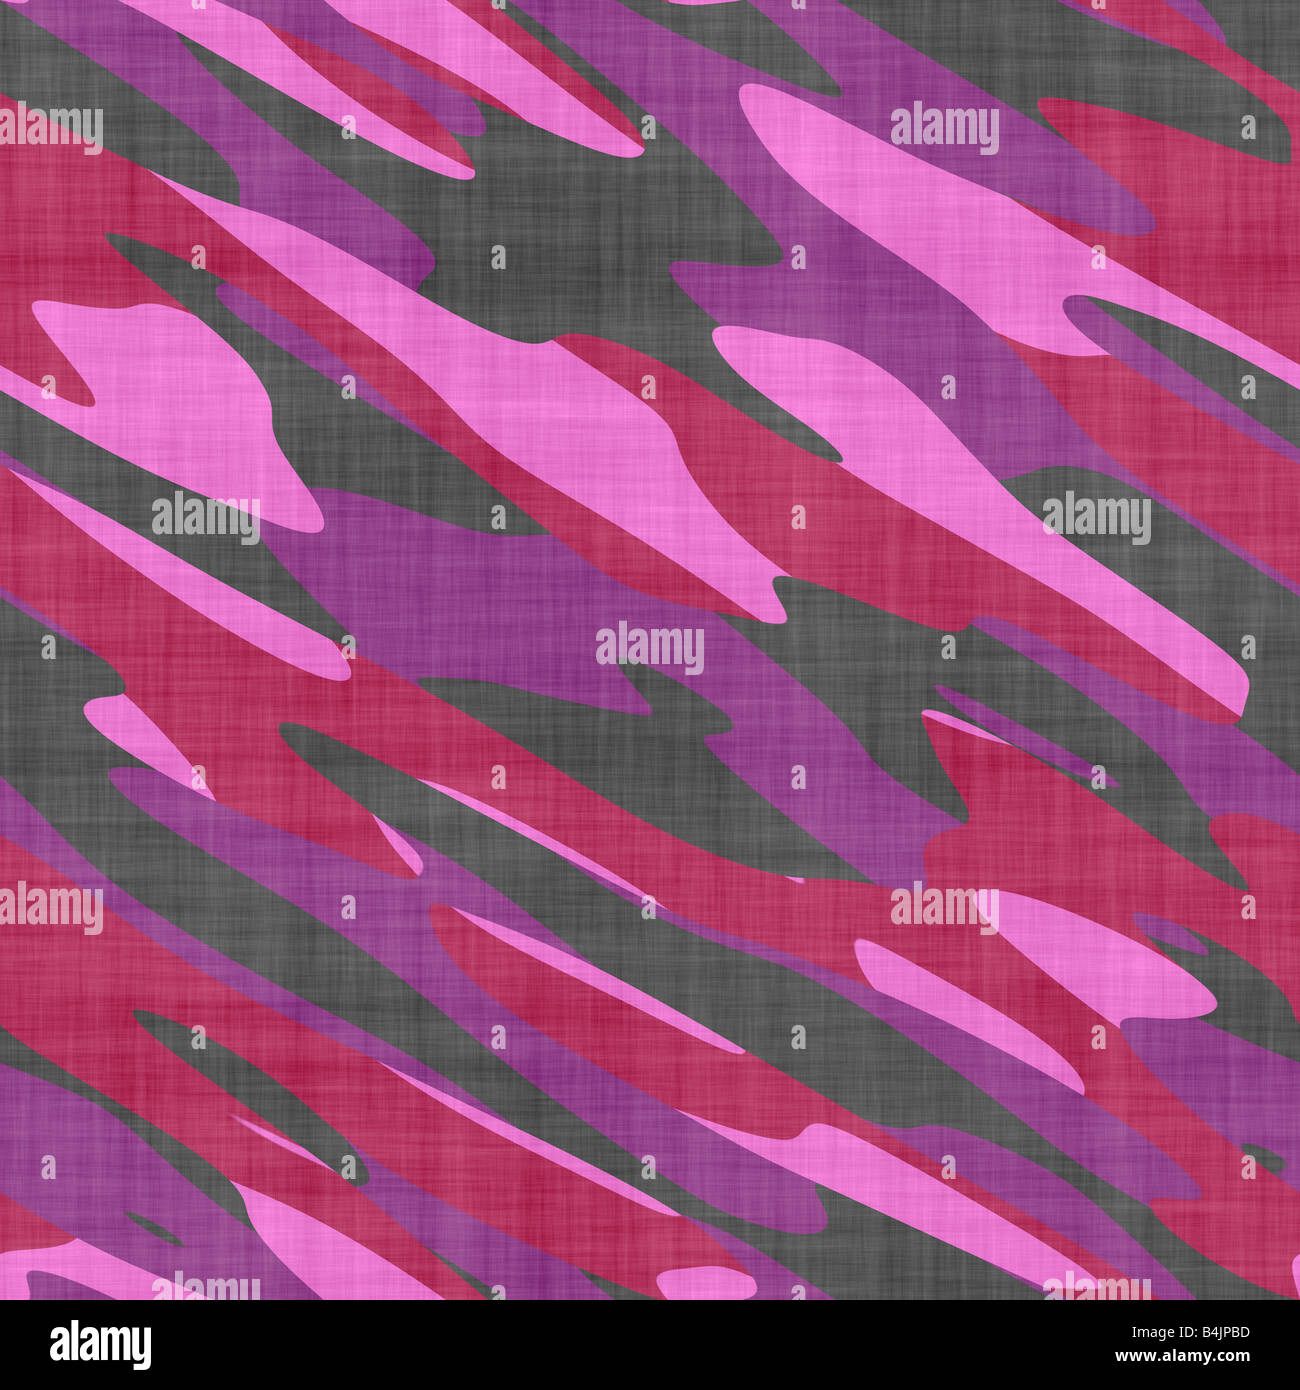 A pink camouflage texture this tiles seamlessly as a pattern Stock Photo